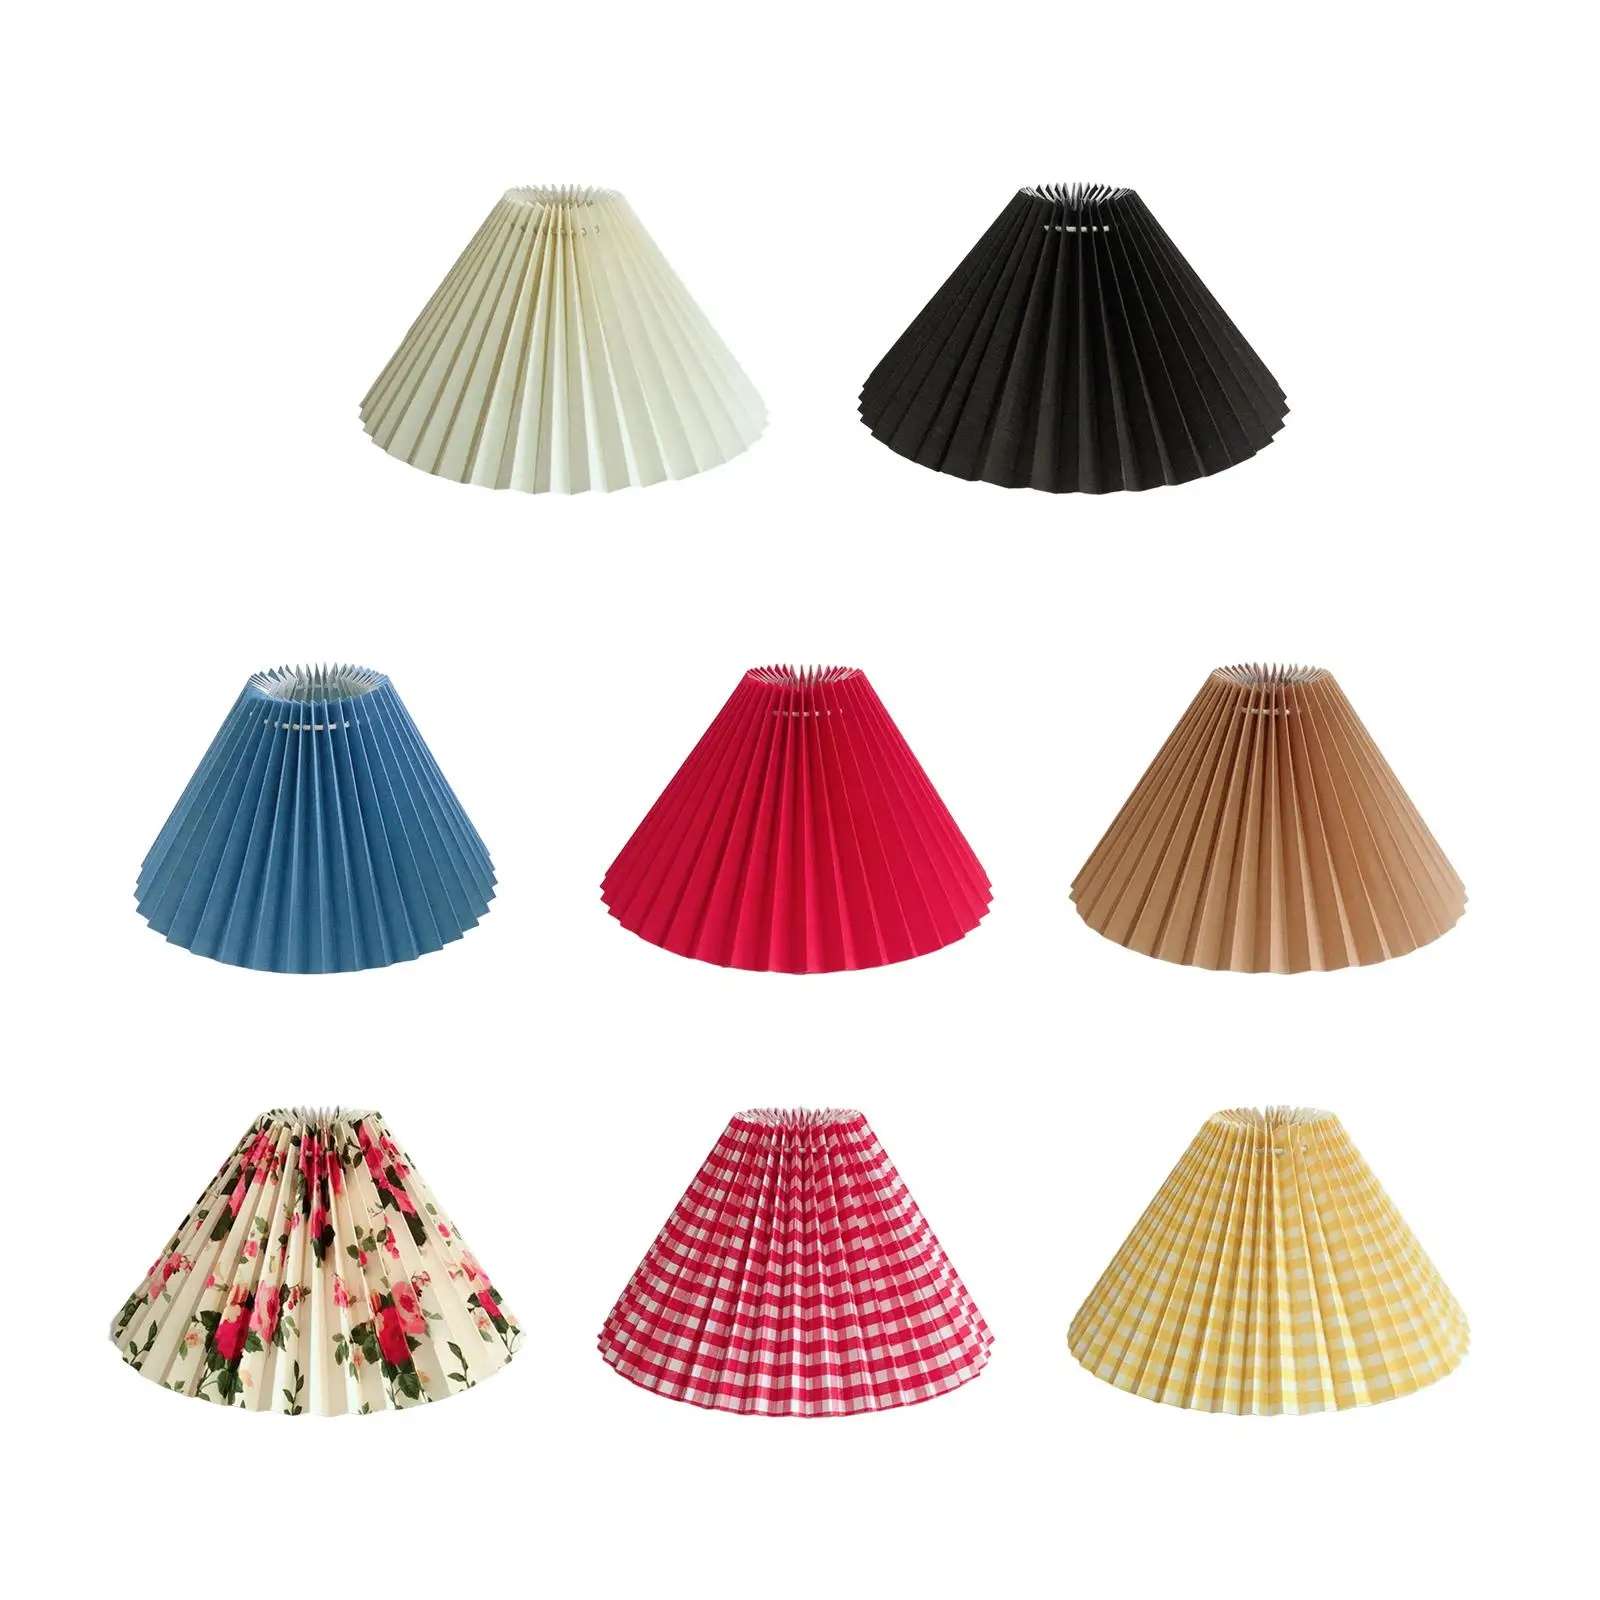 Modern Pleated Lampshade E27 Fabric Lamp Shade Standing Covers Ceiling Light